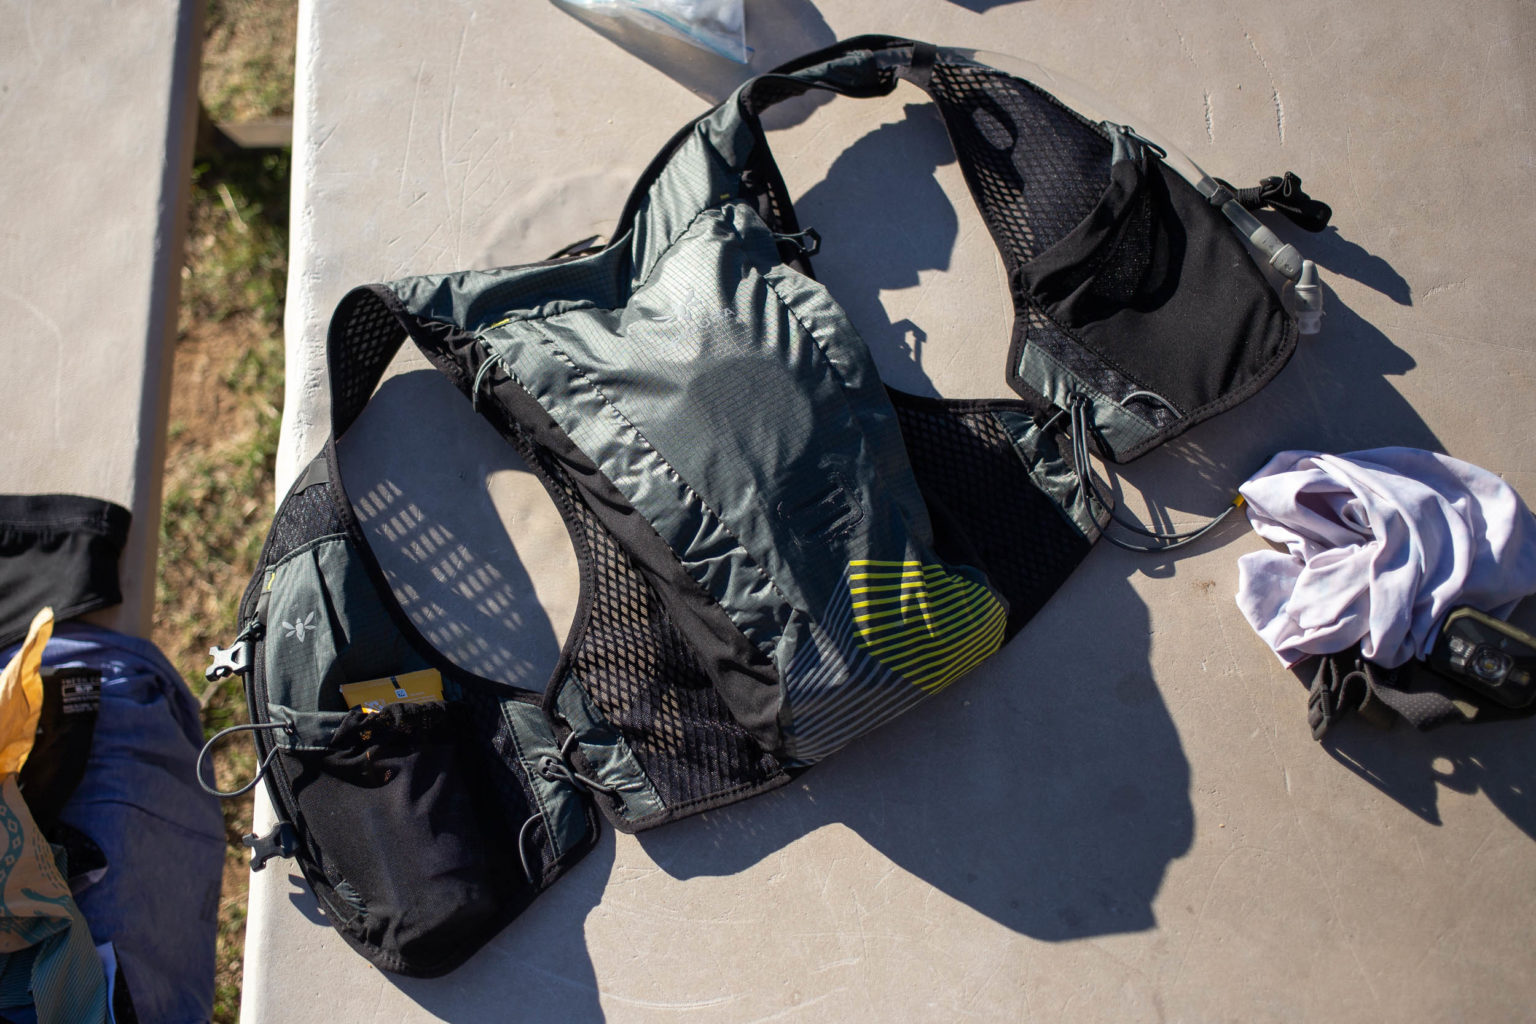 Two Hydration Vests Reviewed: Apidura vs PEdALED - BIKEPACKING.com